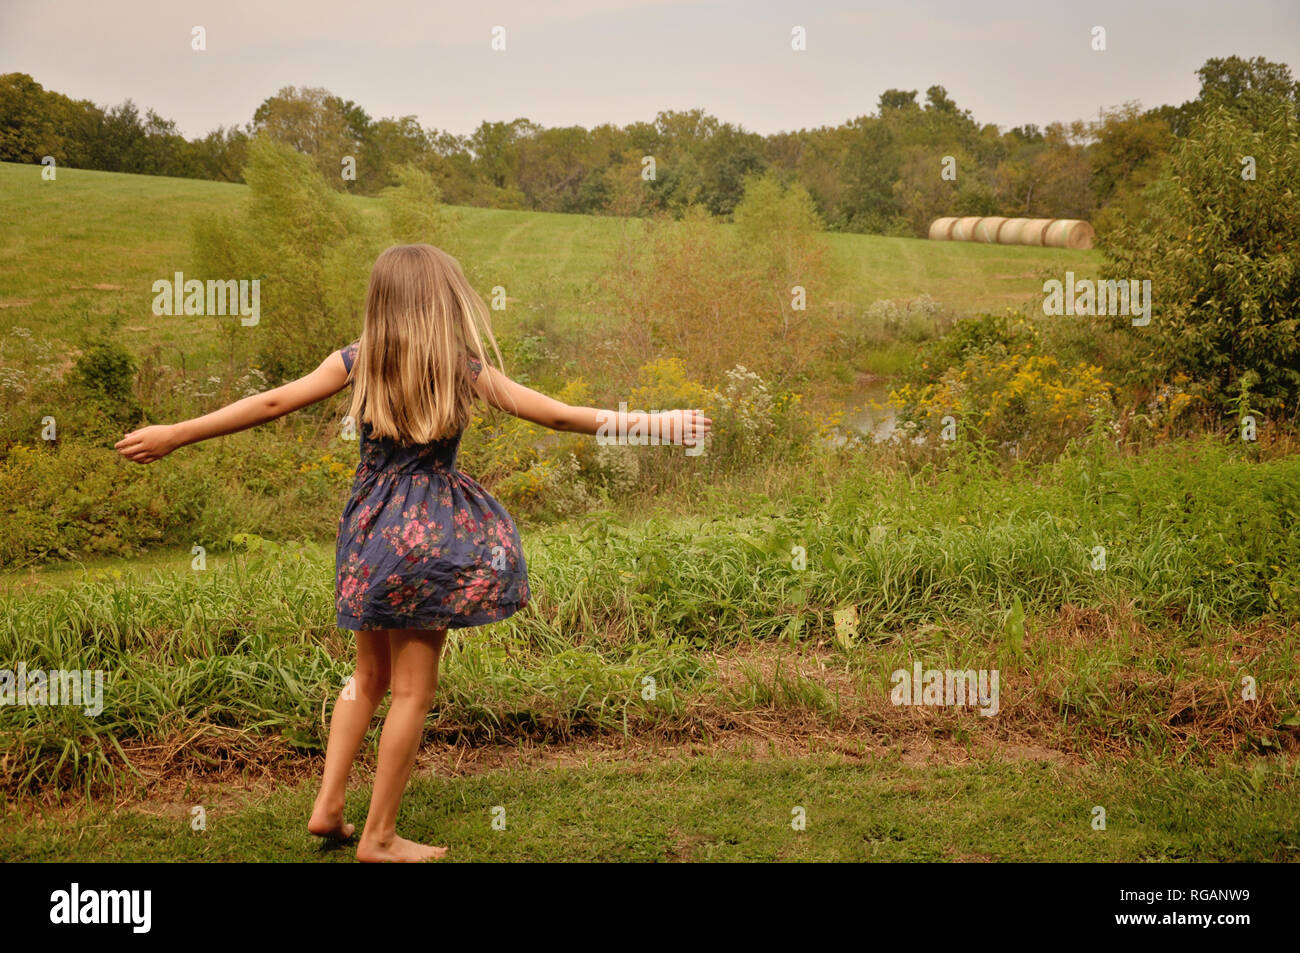 girl in the country Stock Photo